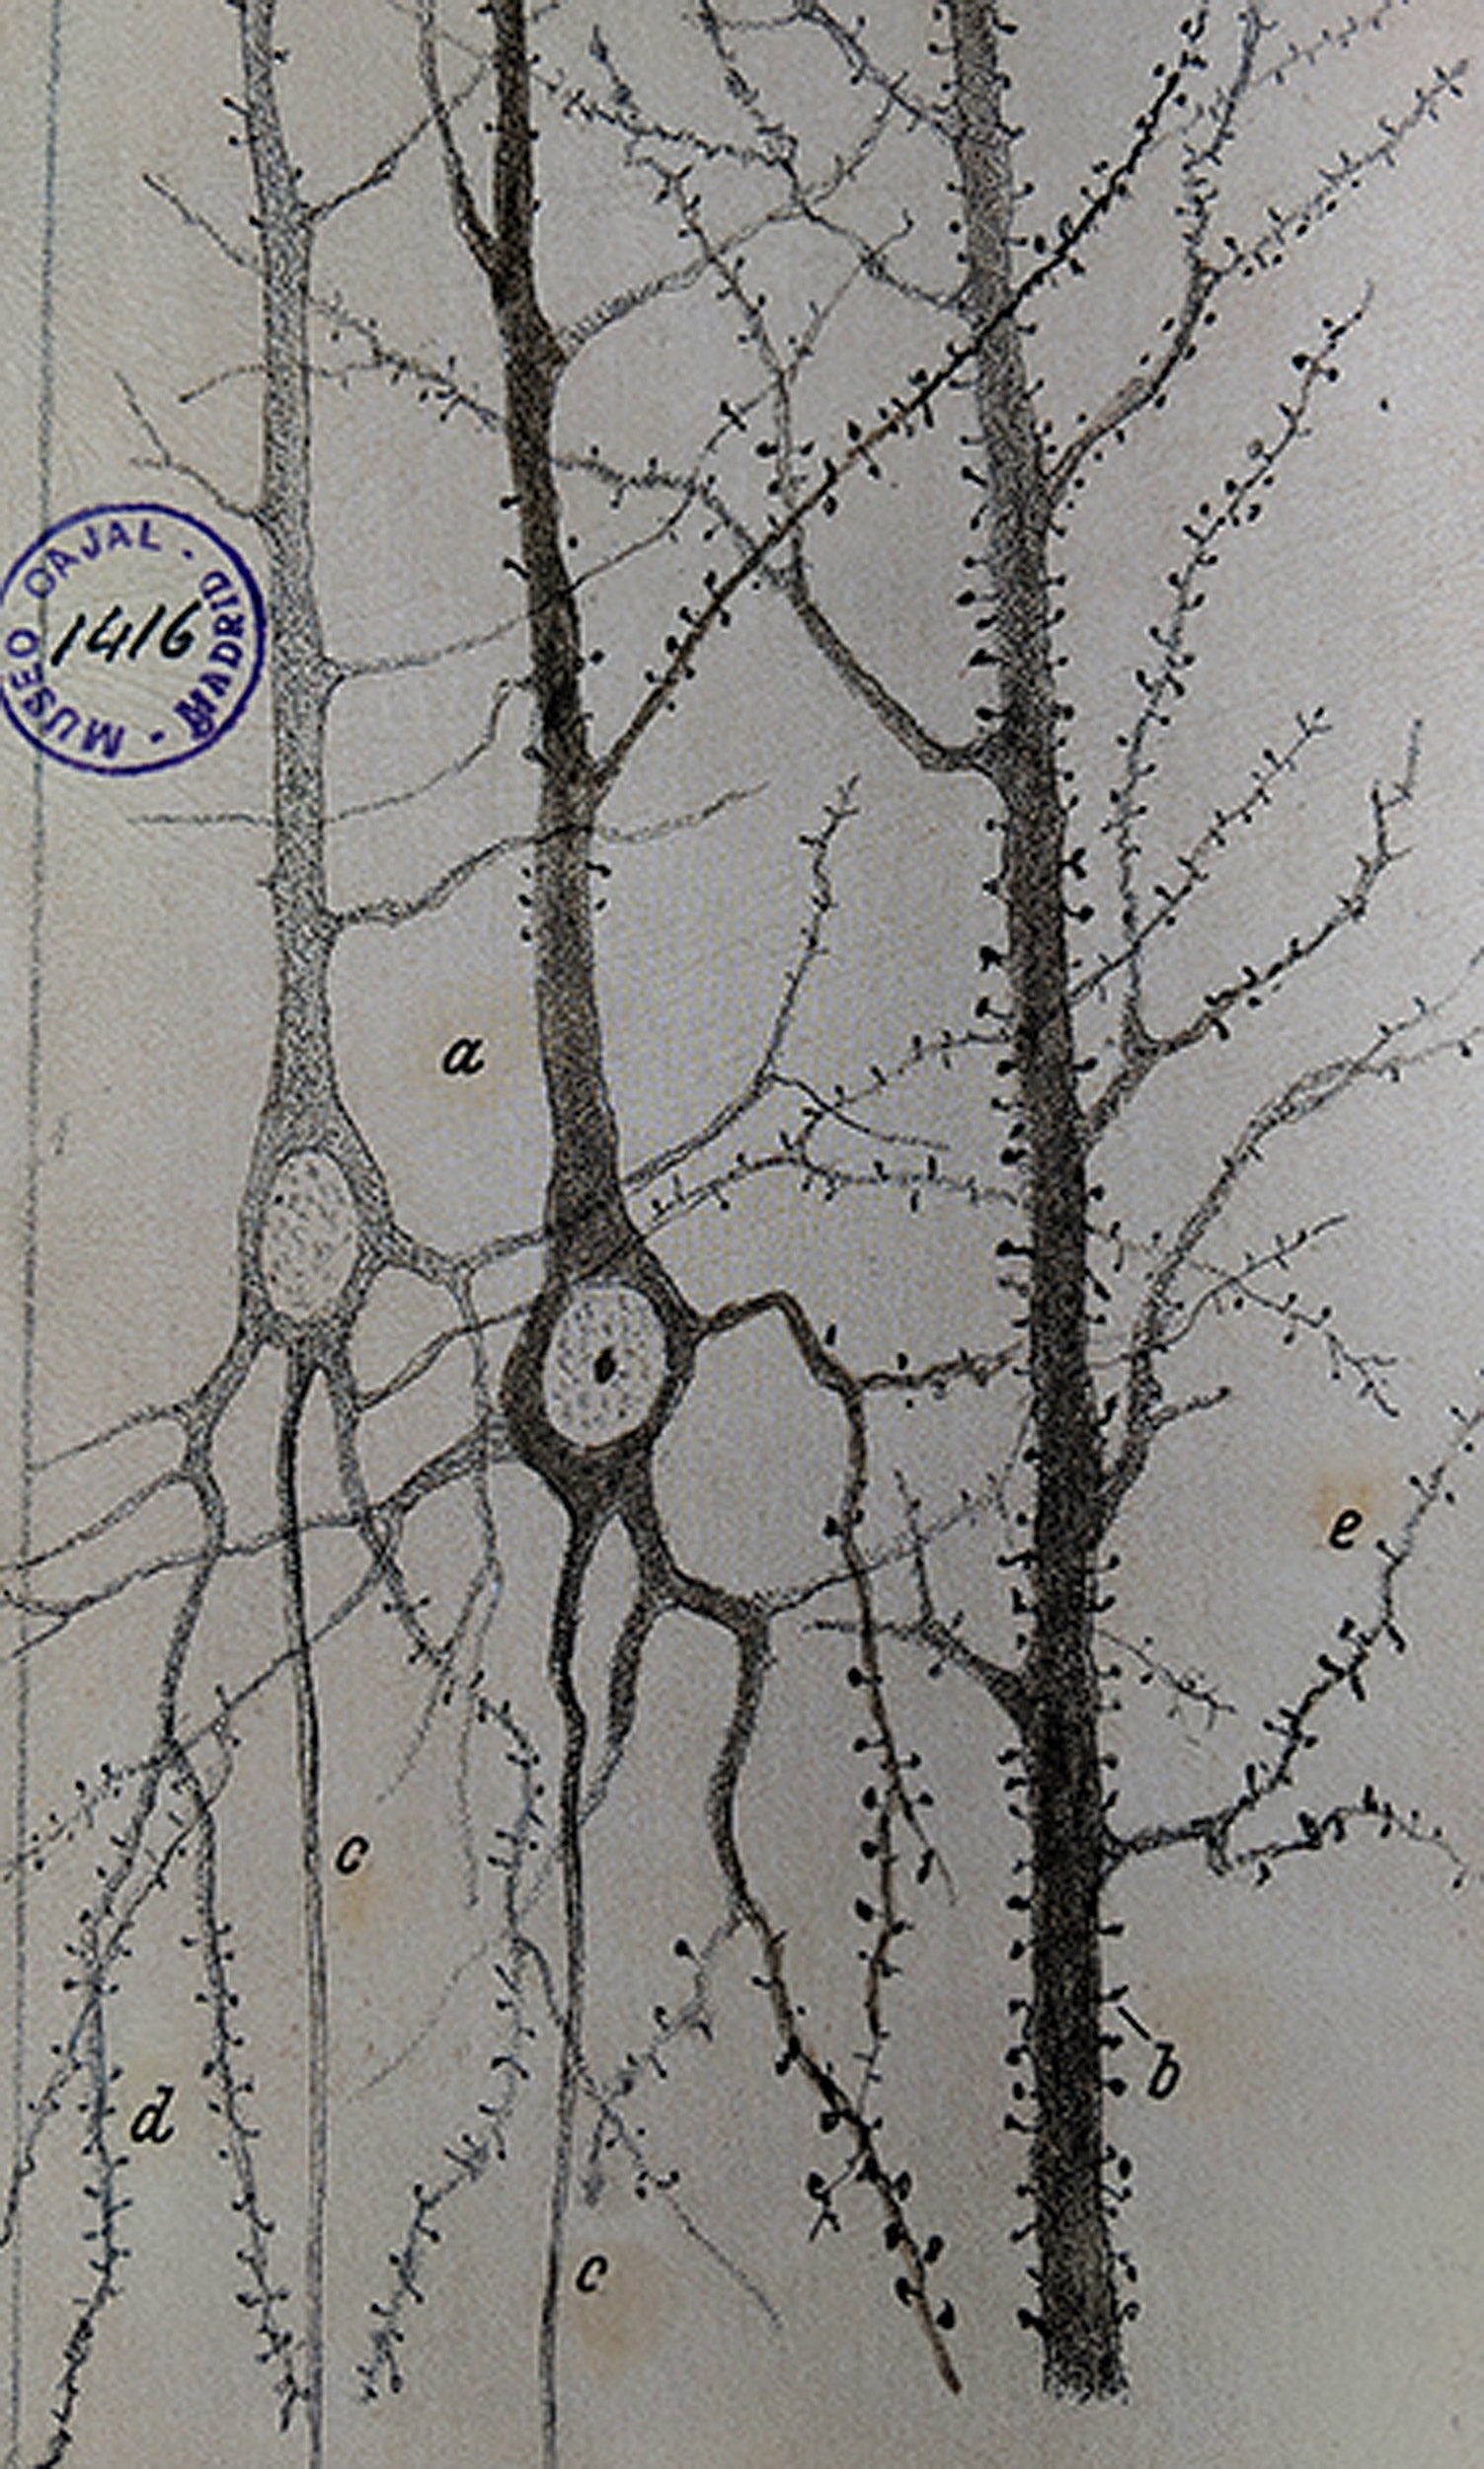 Pyramidal neurons and dendritic spines illustrated by Ramón y Cajal.